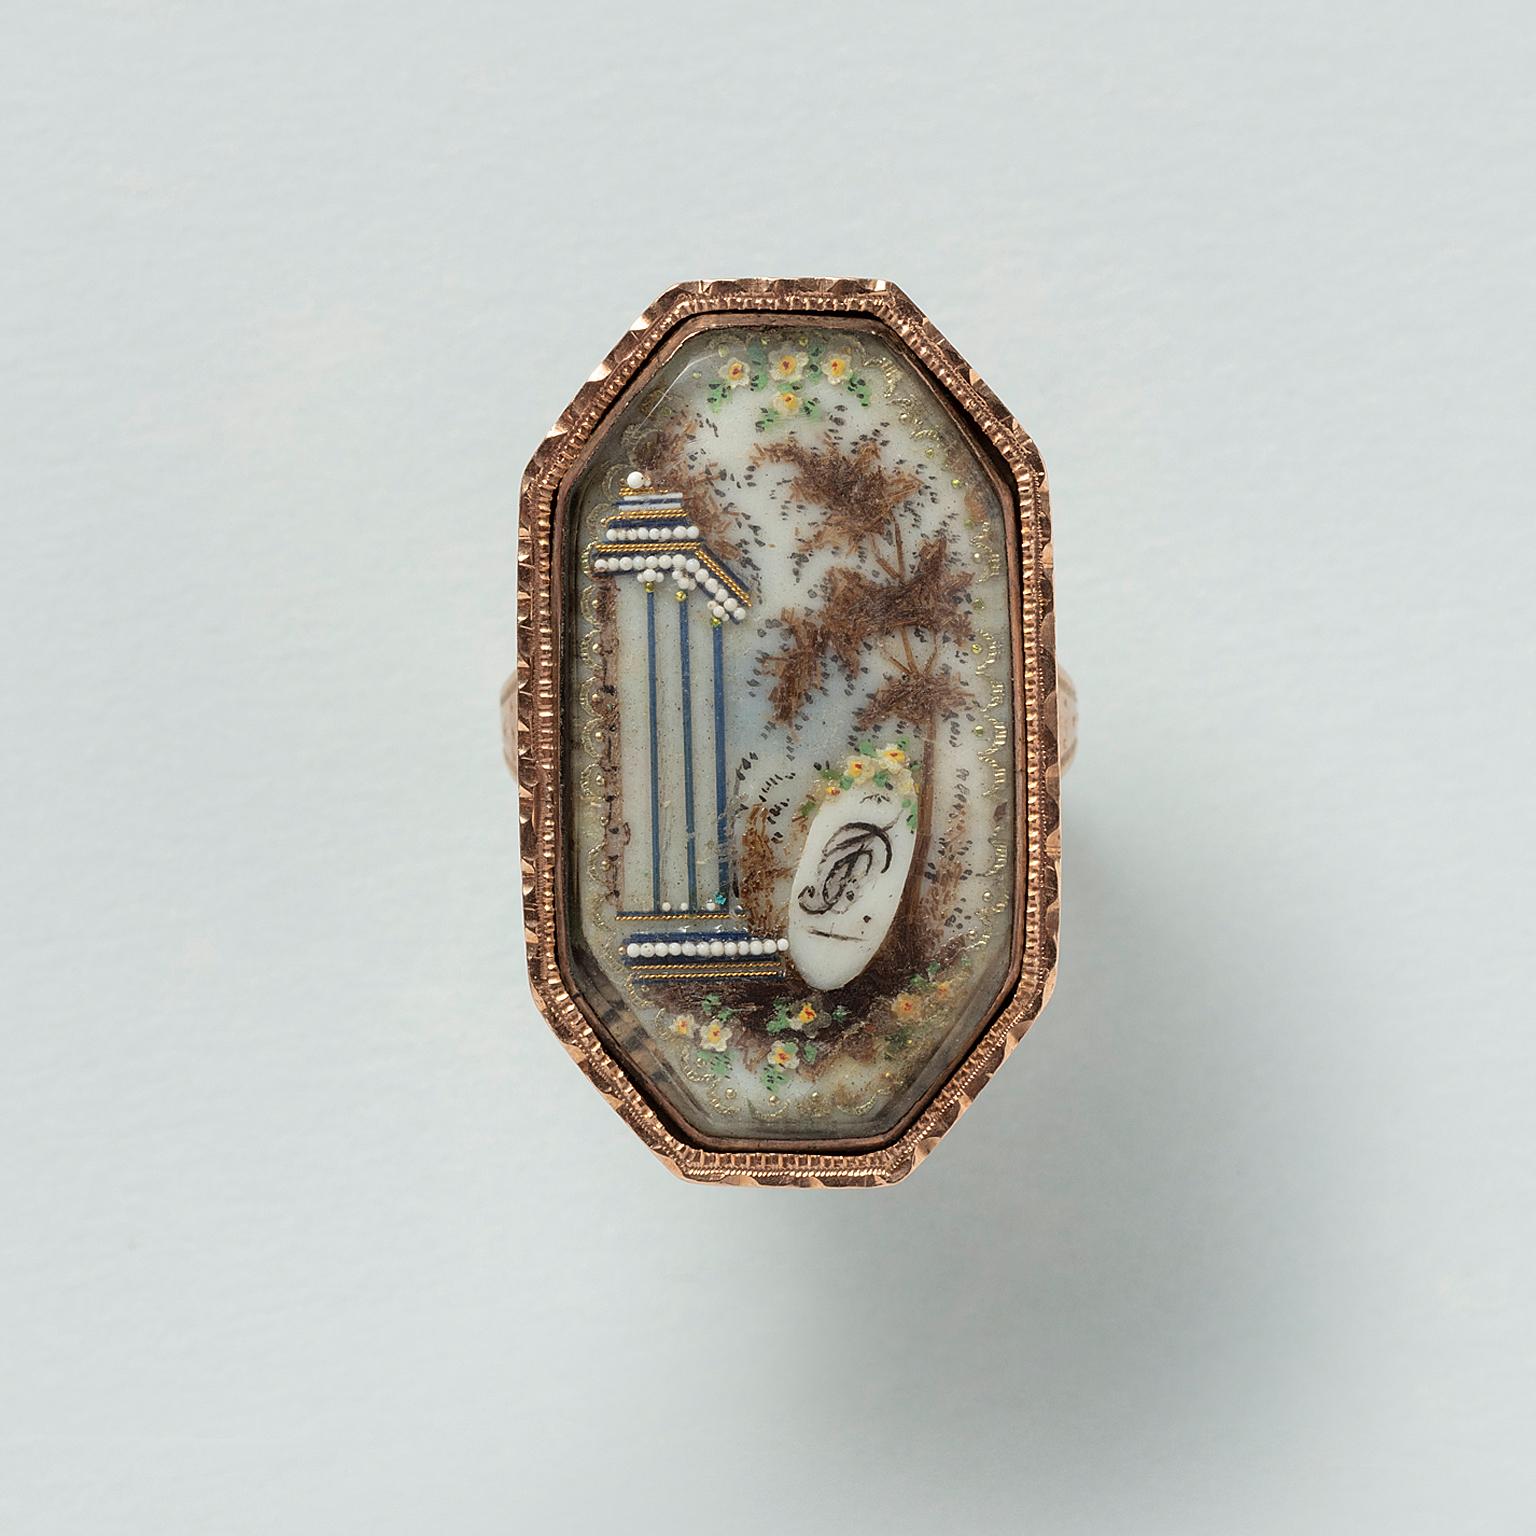 A large octagonal ring adorned with a Neo-Classical landscape. The scene features a classical colonnade and a gracefully waving tree, accompanied by a shield bearing the letters F and C. At first glance, one might wonder how such imagery could serve